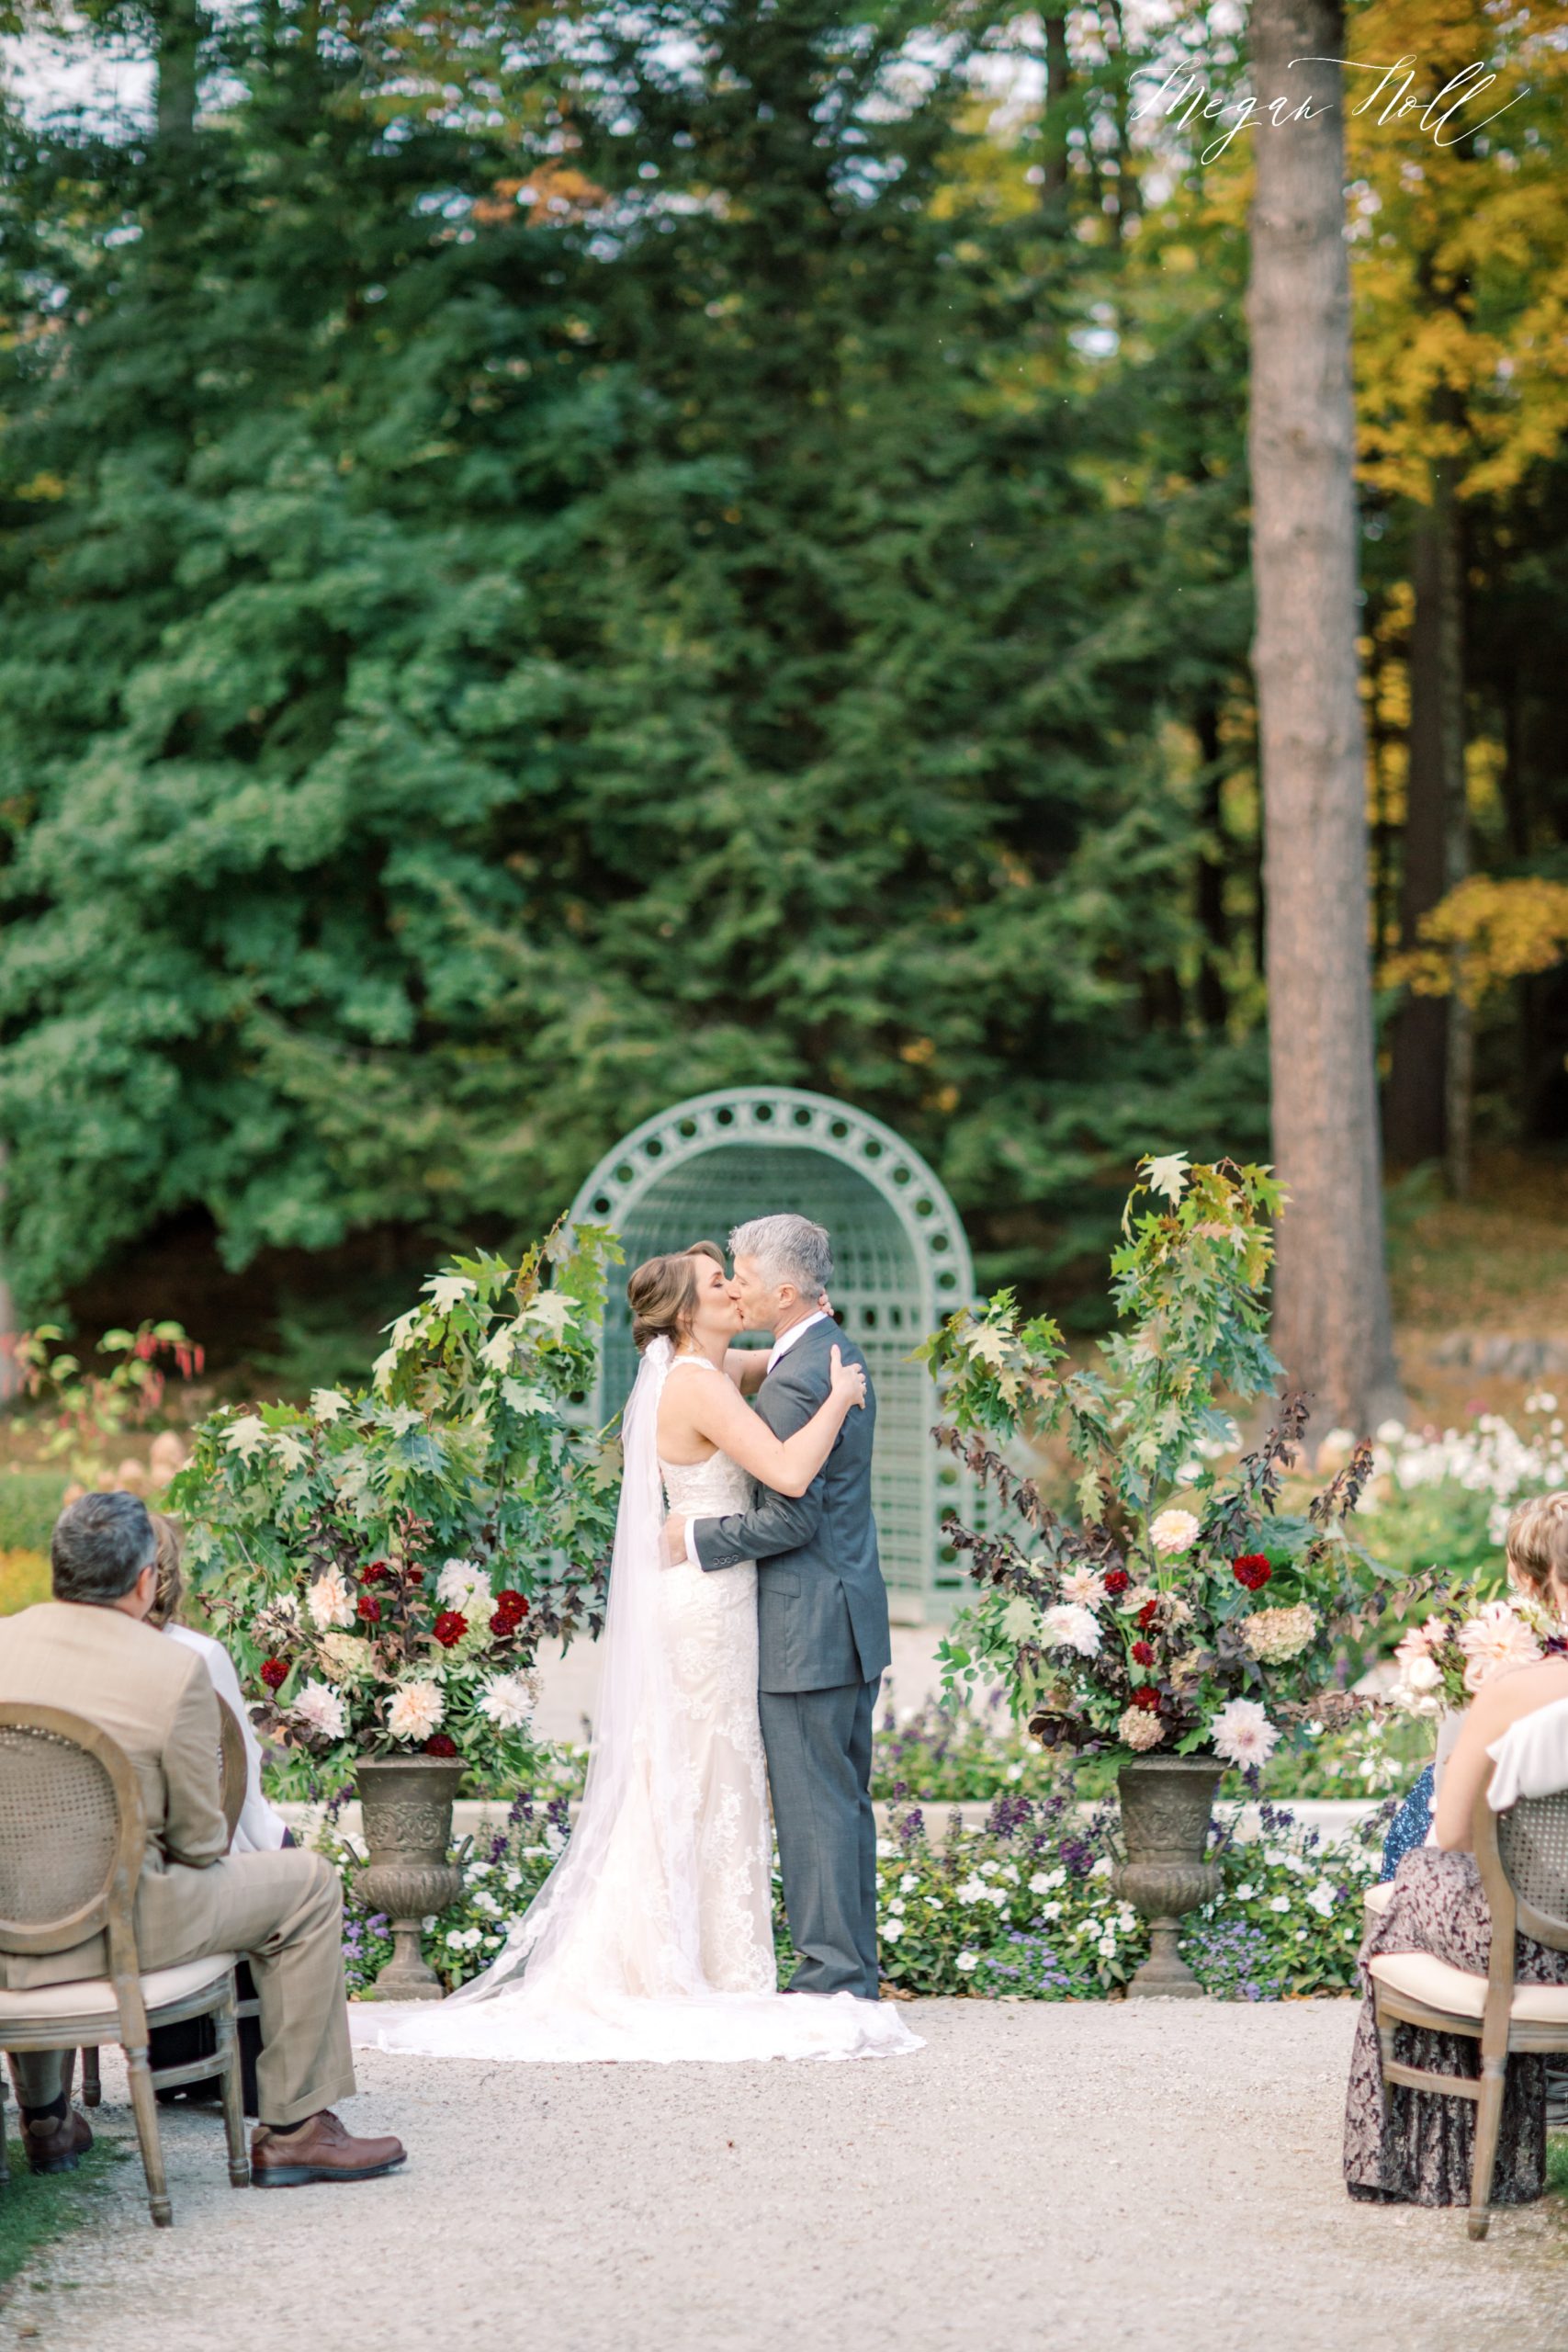 First kiss in outdoor fall wedding ceremony at Edith Wharton Mansion